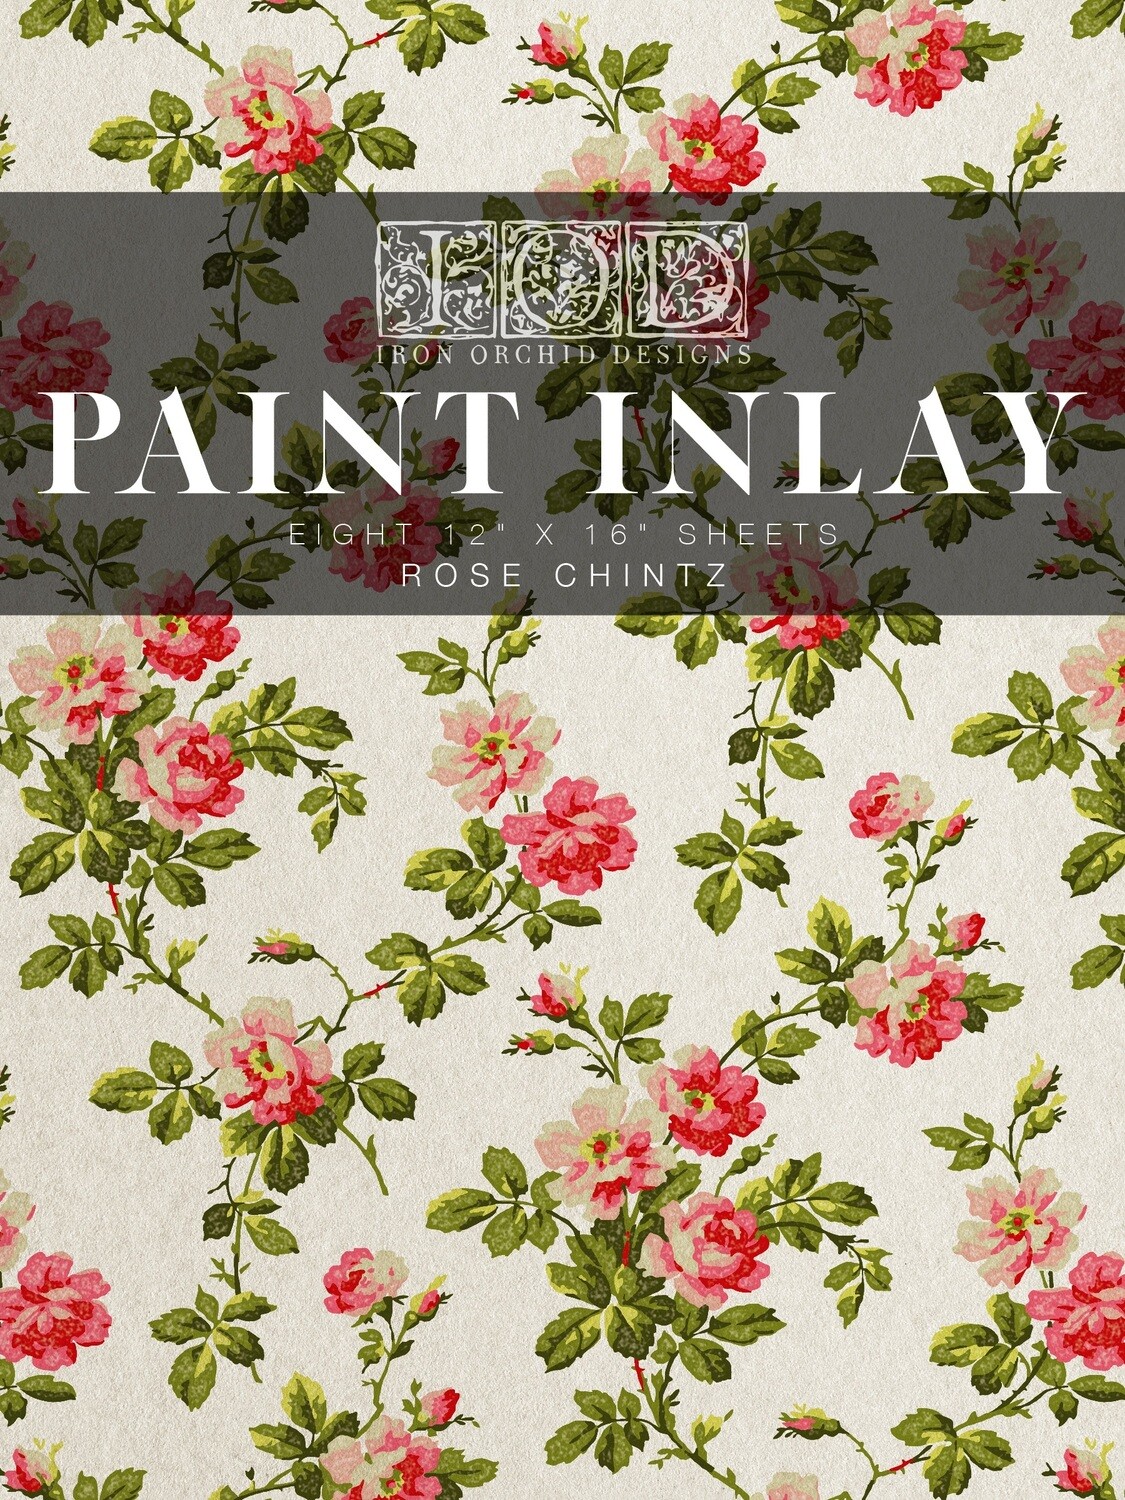 PAINT INLAY / "FLORAL CHINTZ"